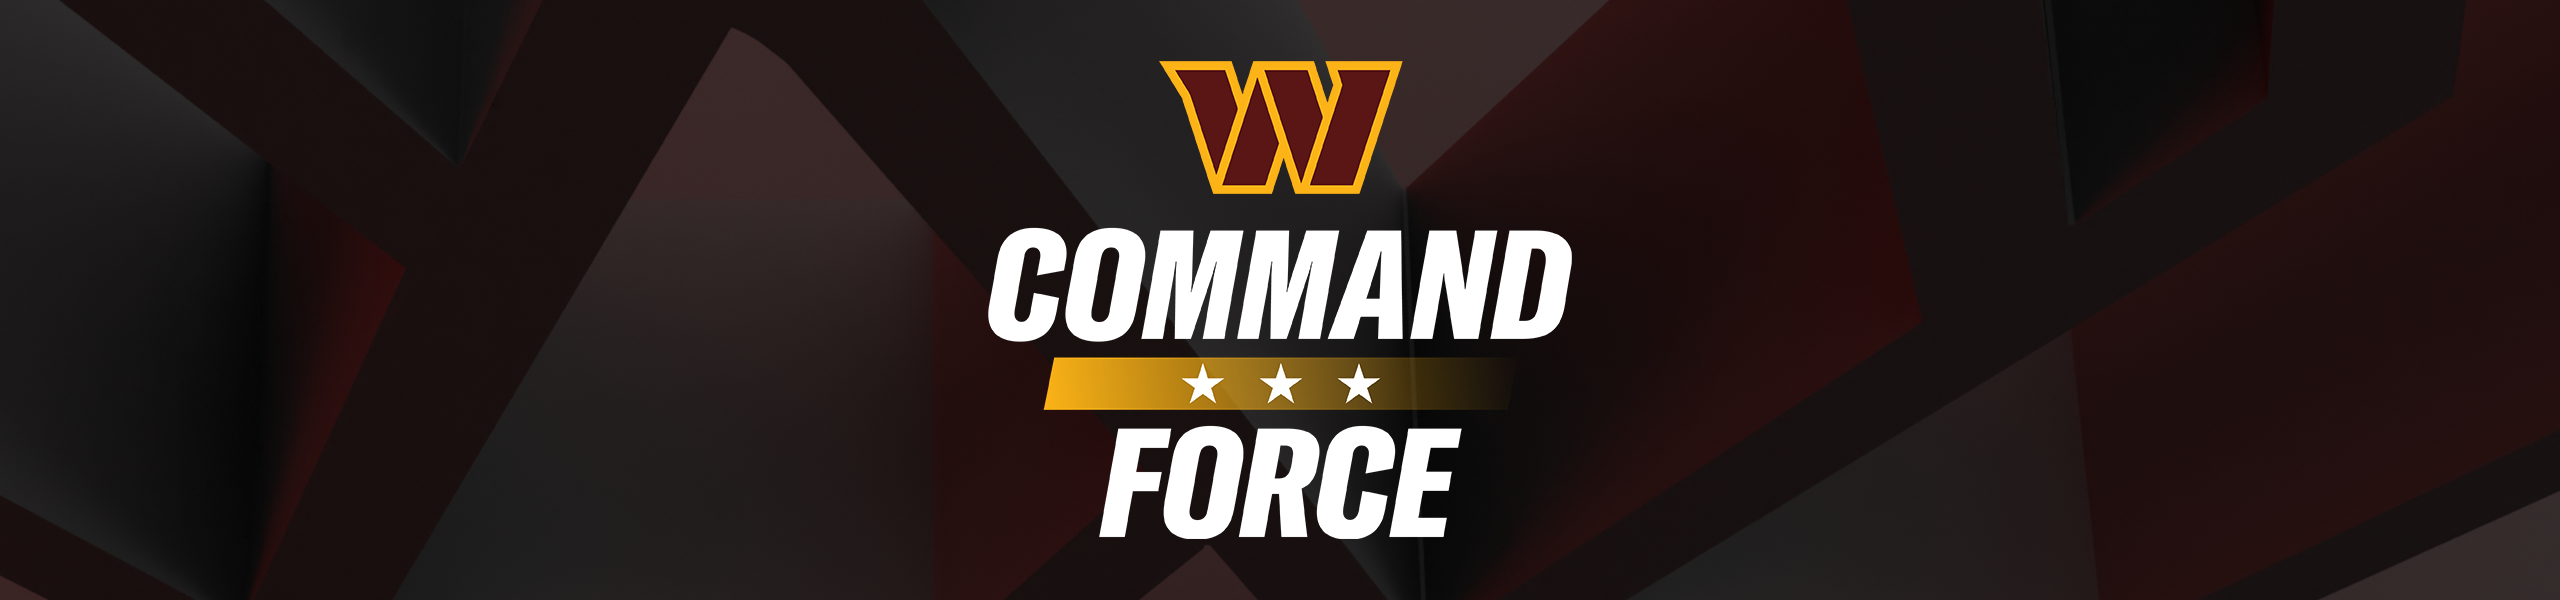 Official Site of the Washington Commanders